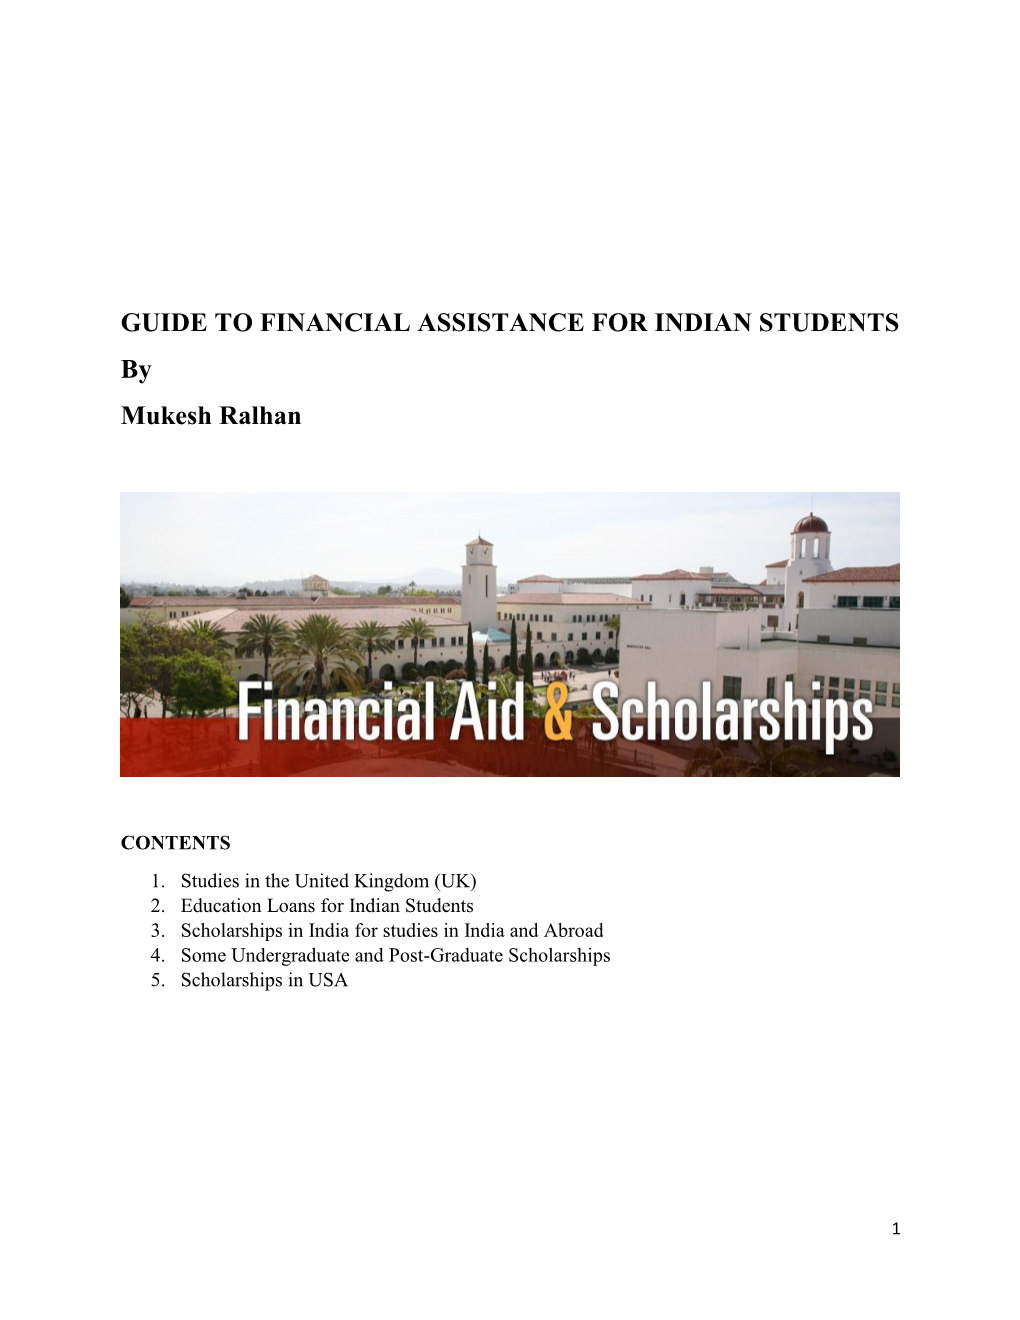 GUIDE to FINANCIAL ASSISTANCE for INDIAN STUDENTS by Mukesh Ralhan